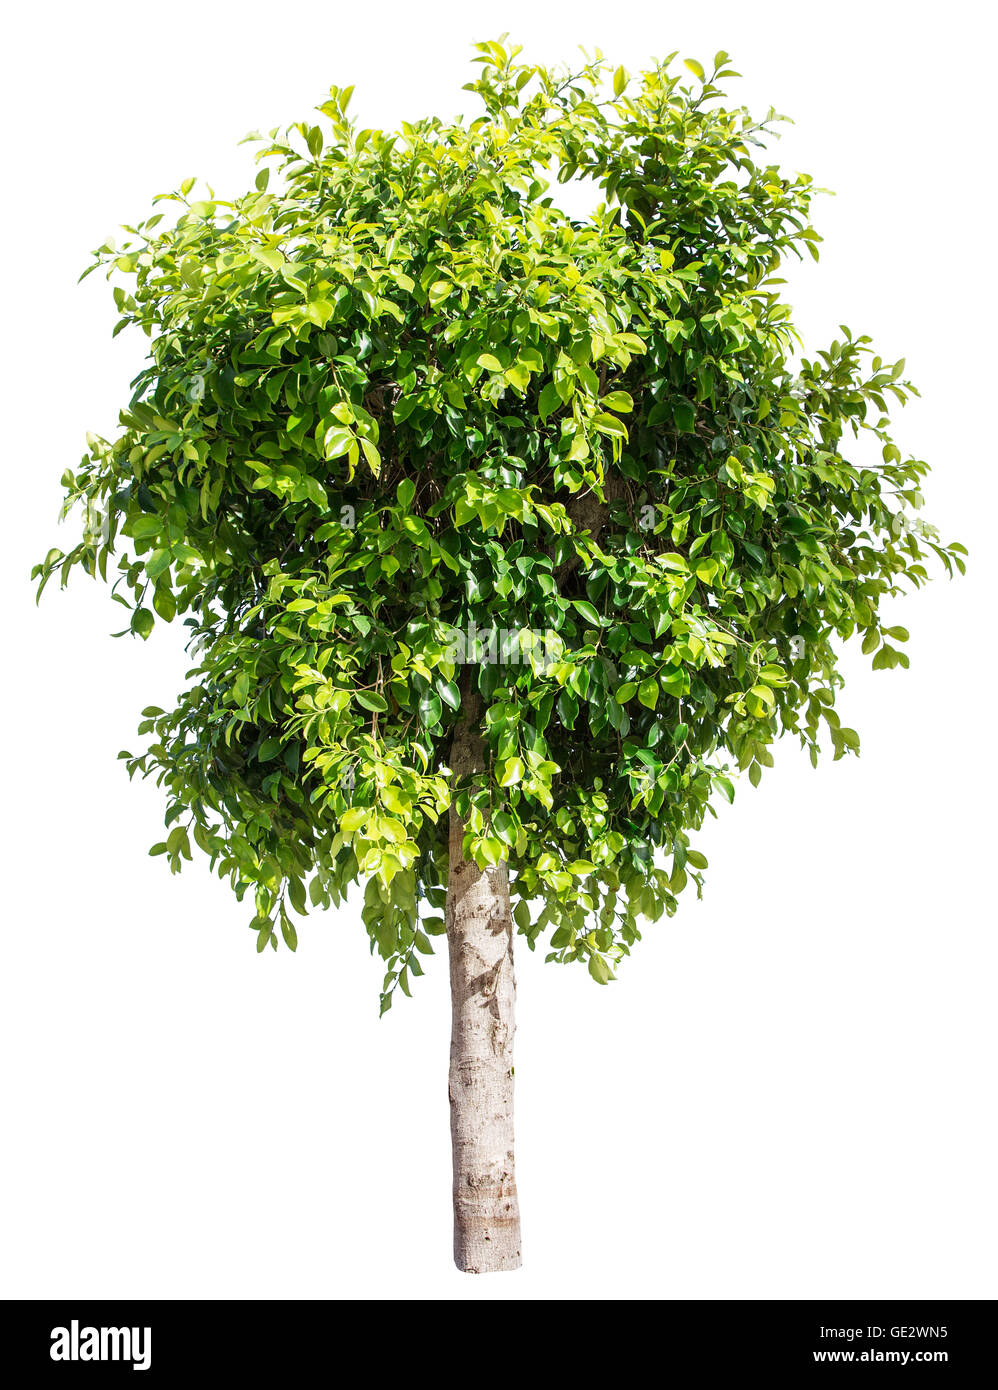 Ficus tree. File contains clipping paths. Stock Photo